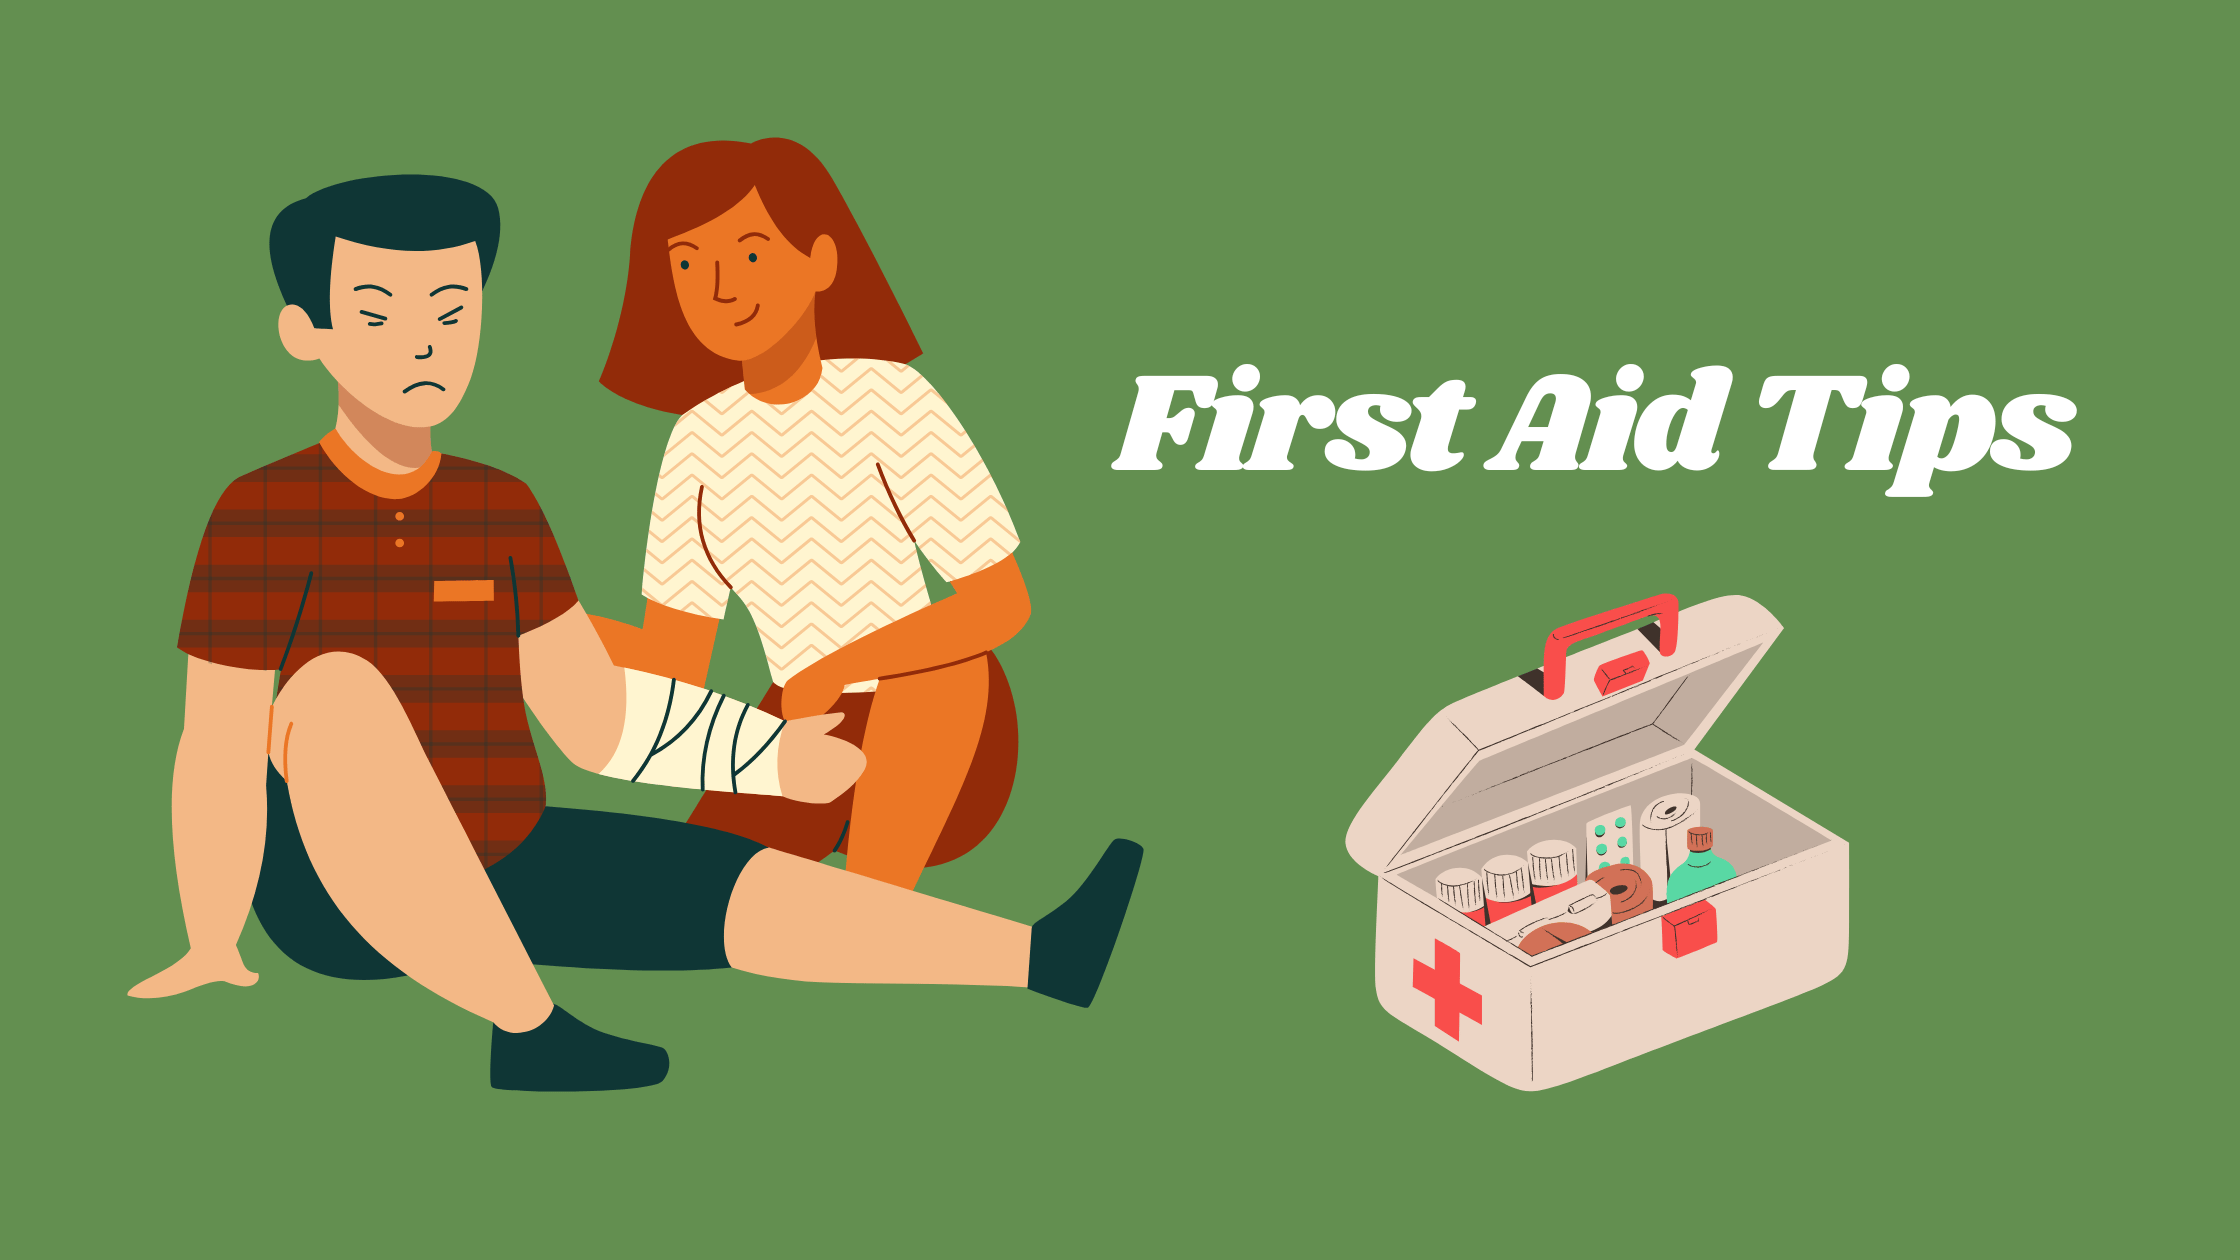 First Aid tips